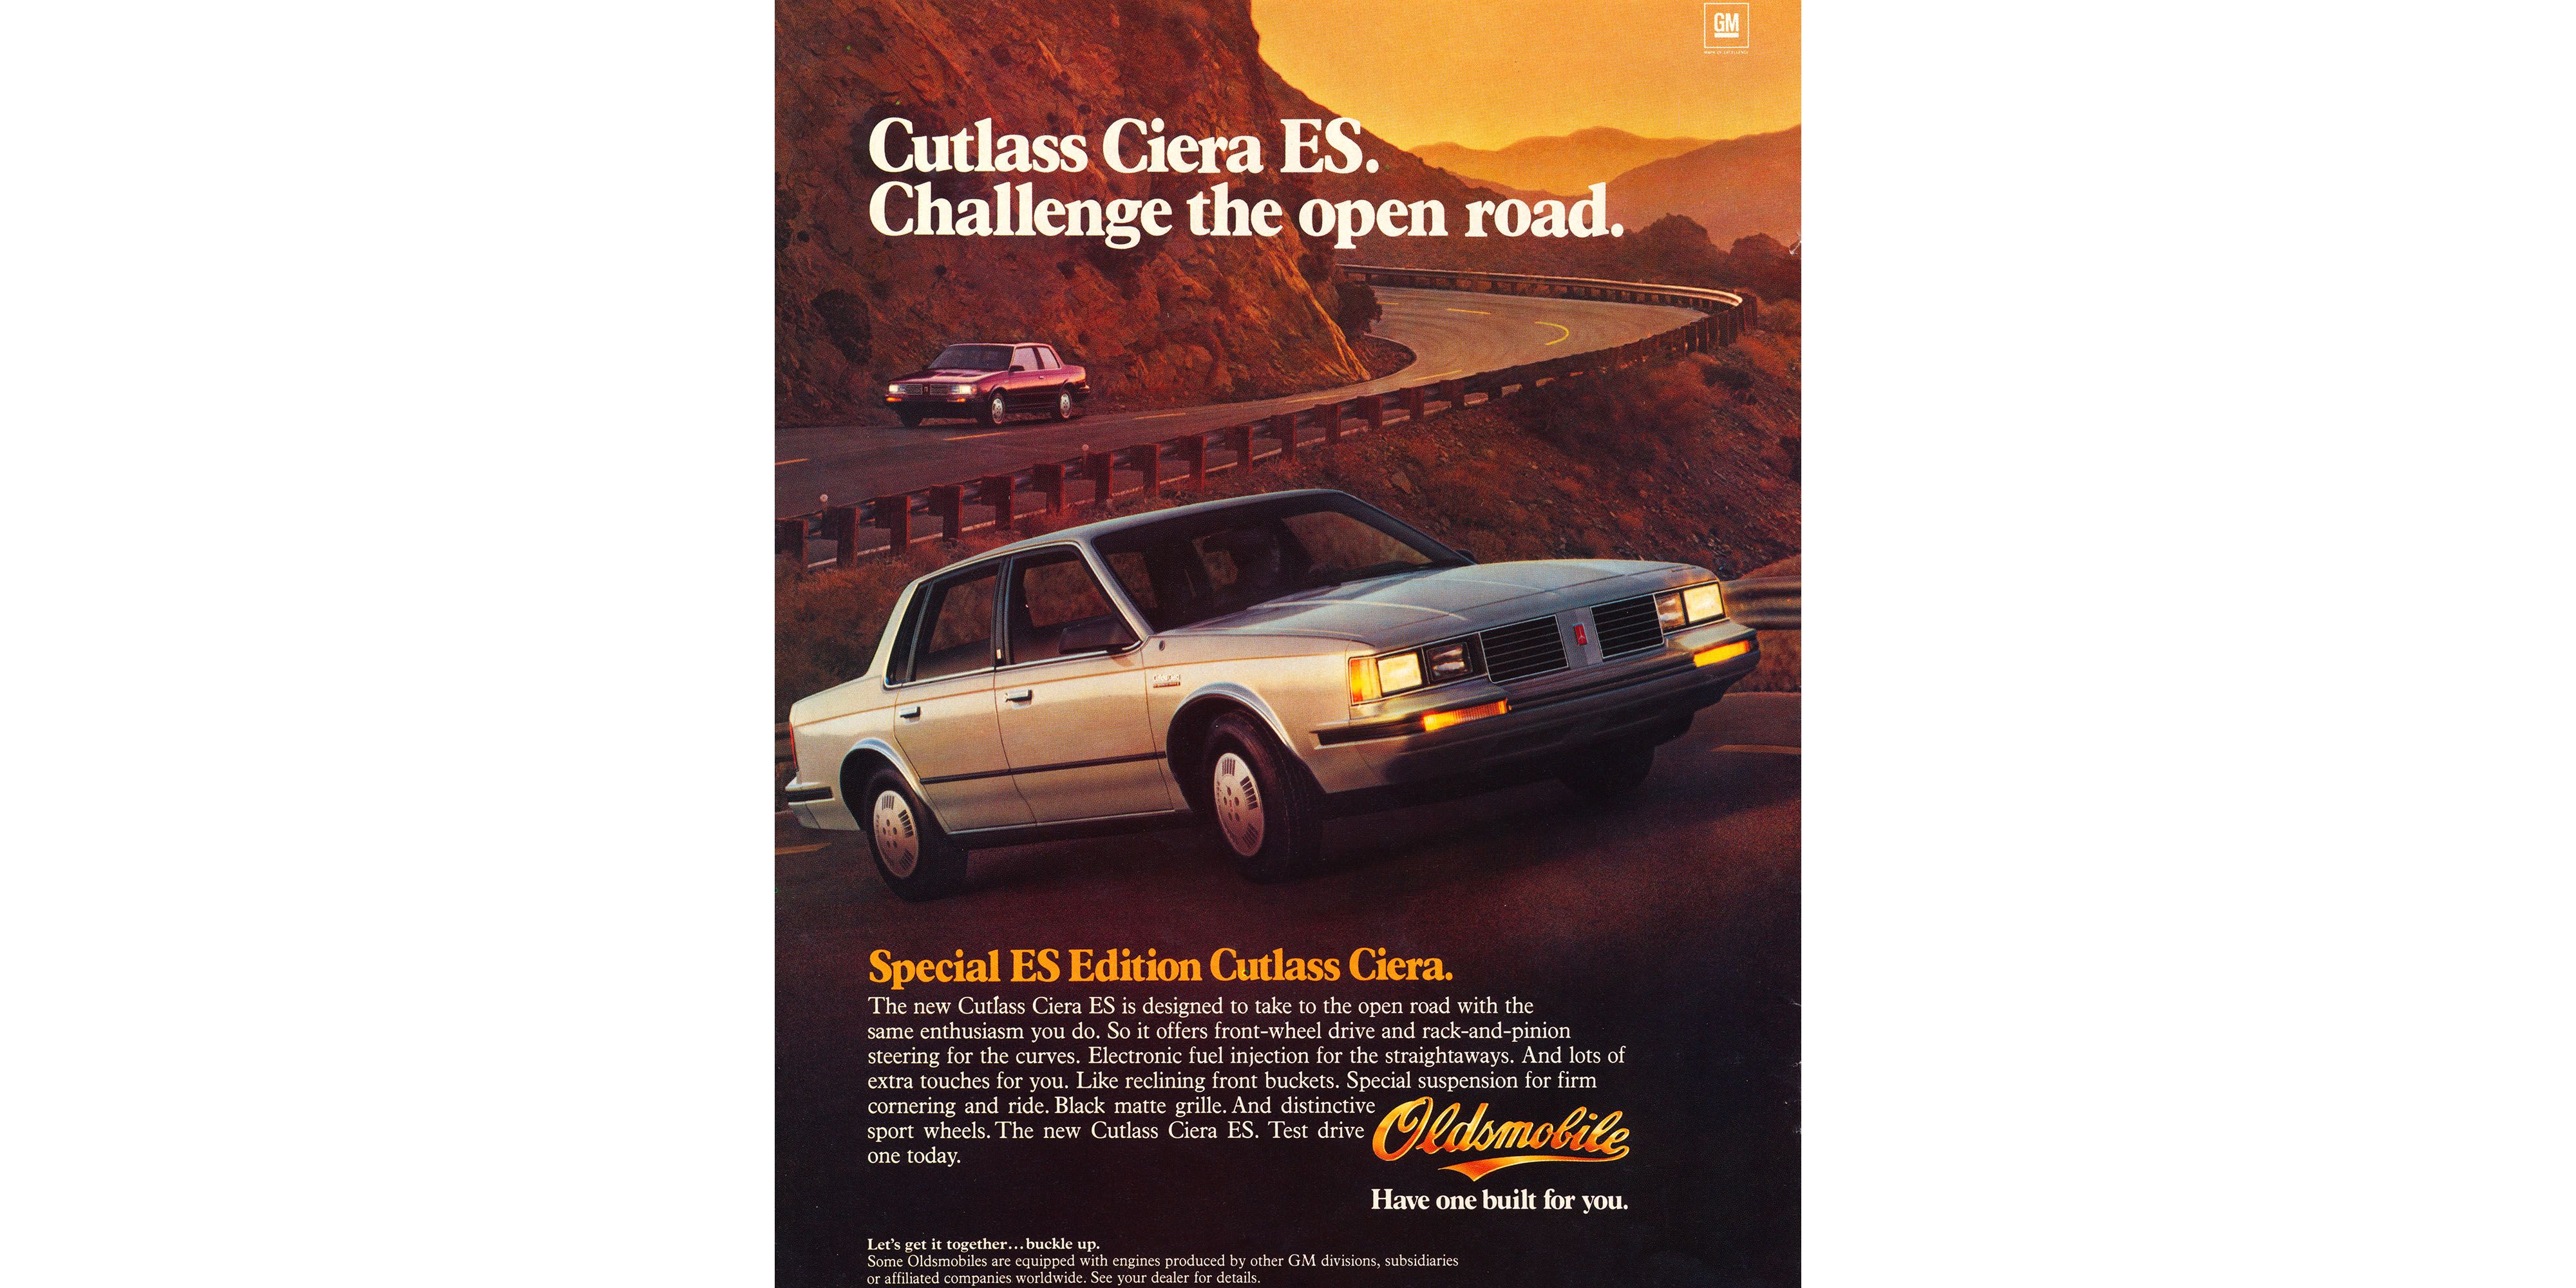 Challenge the Open Road with a 1983 Cutlass Ciera